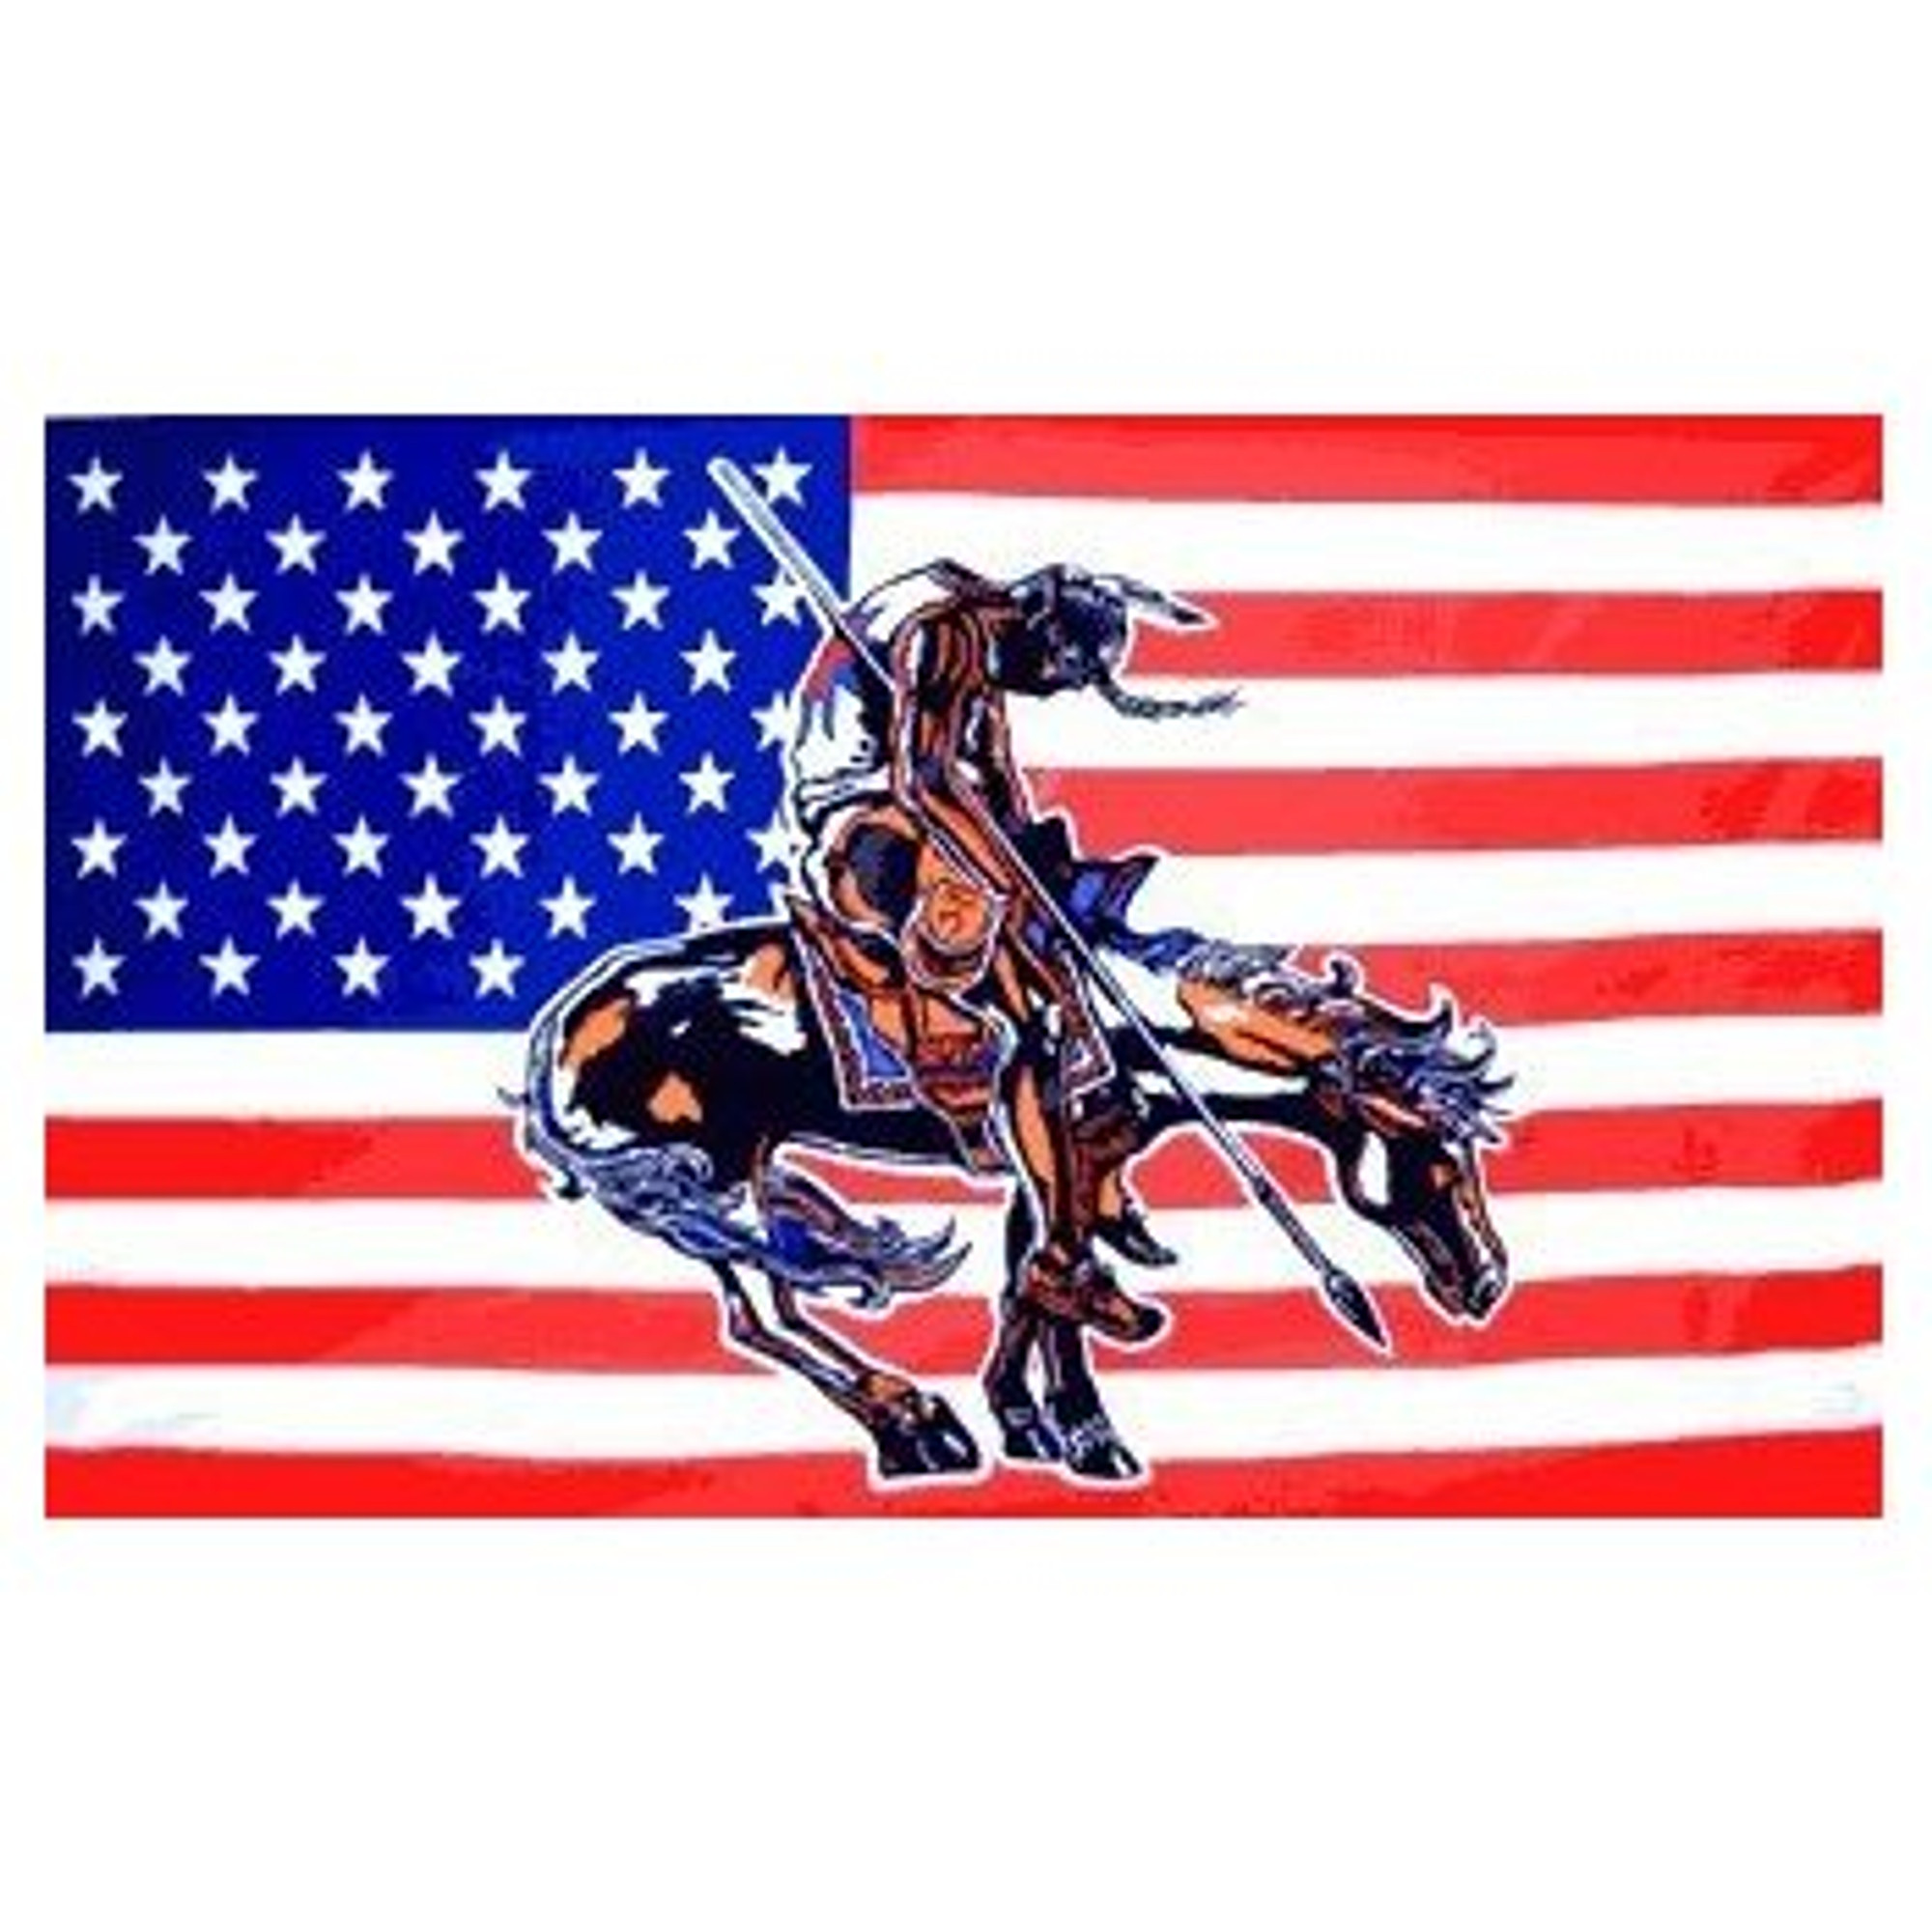 U.S. Native Indian "End Of The Trail" American Flag